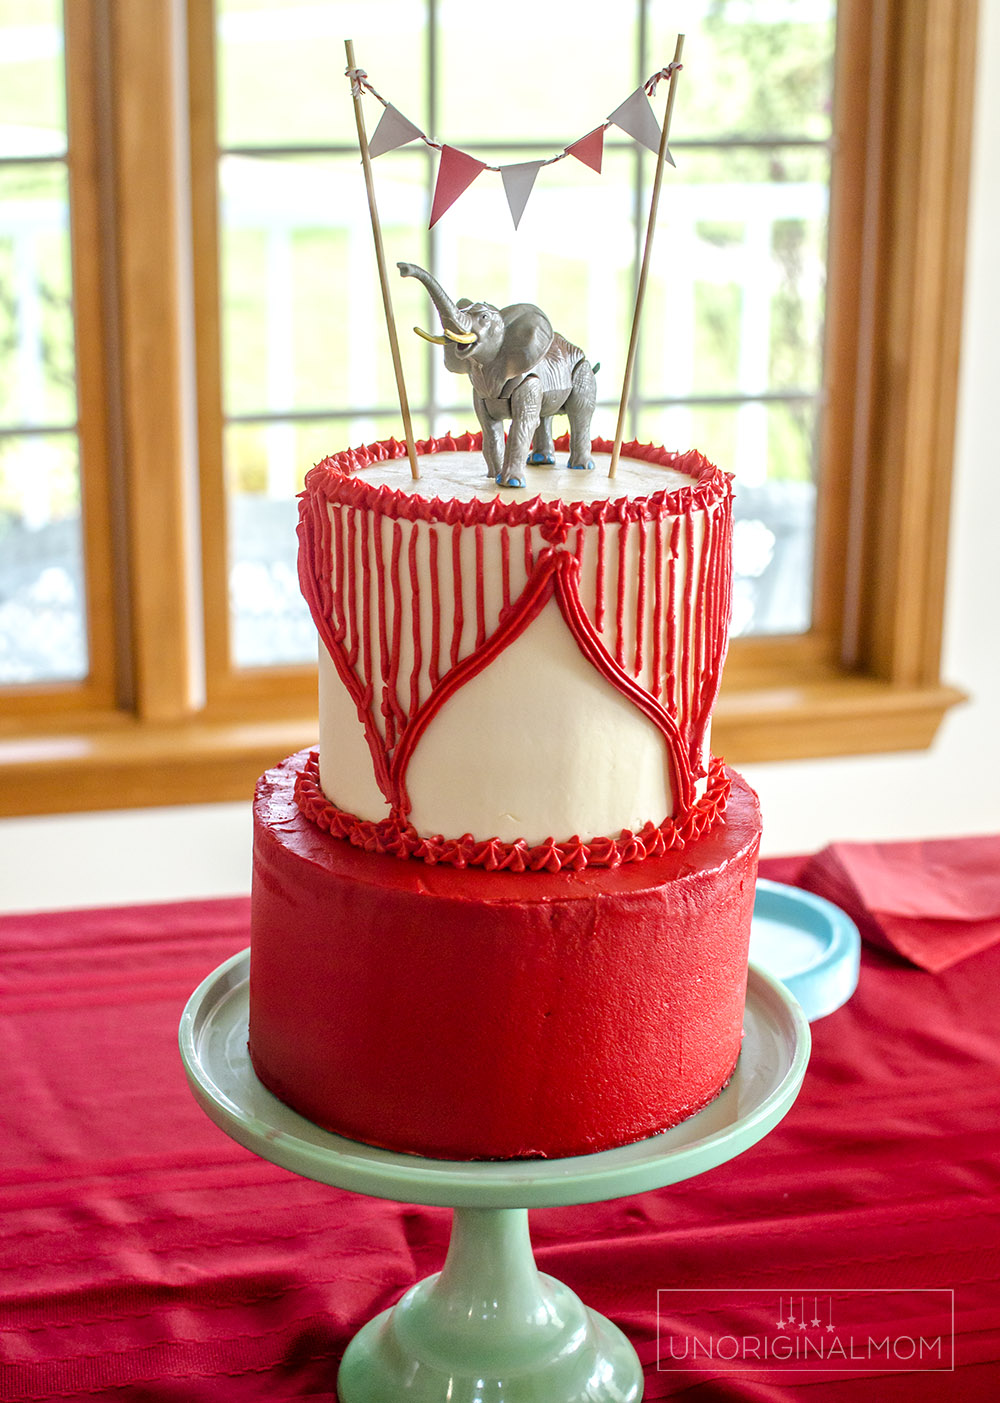 Planning a Circus Baby Shower or a Circus themed party? Here are a bunch of fun DIY Circus elements!